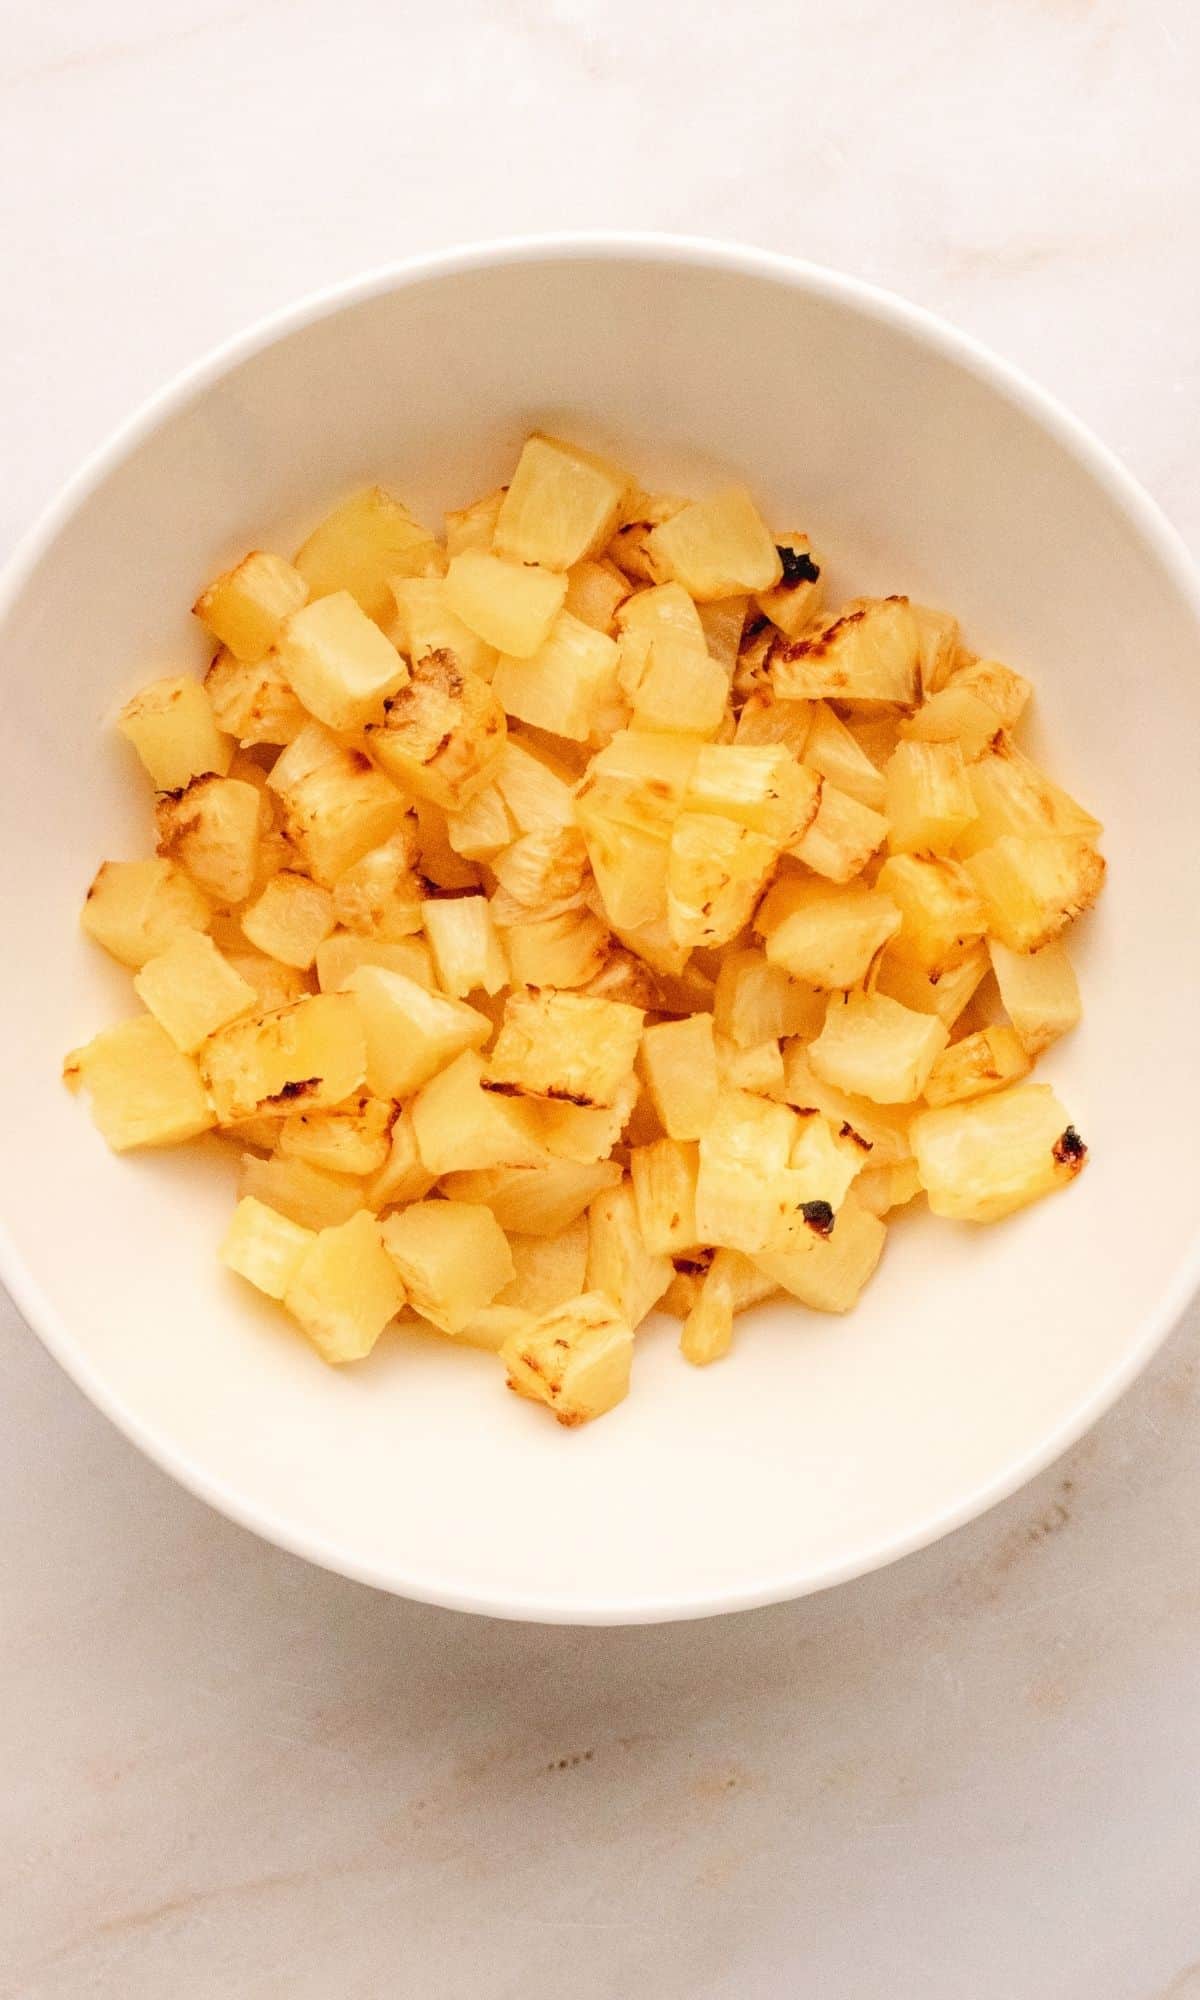 Chopped roasted pineapple in a white bowl.